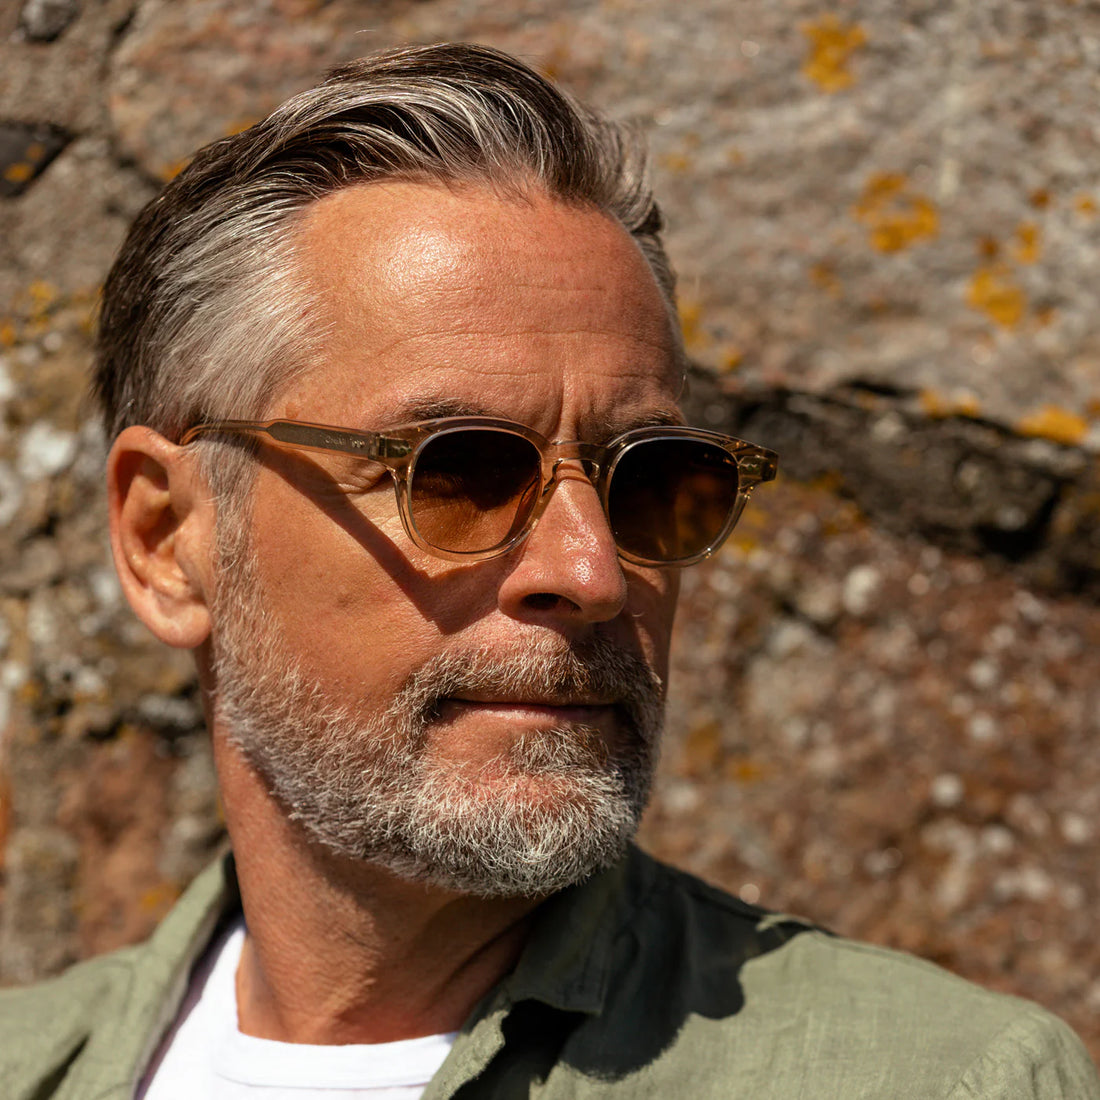 Bearded middle-aged man wearing sunglasses and a turtleneck, looking thoughtfully to the side.